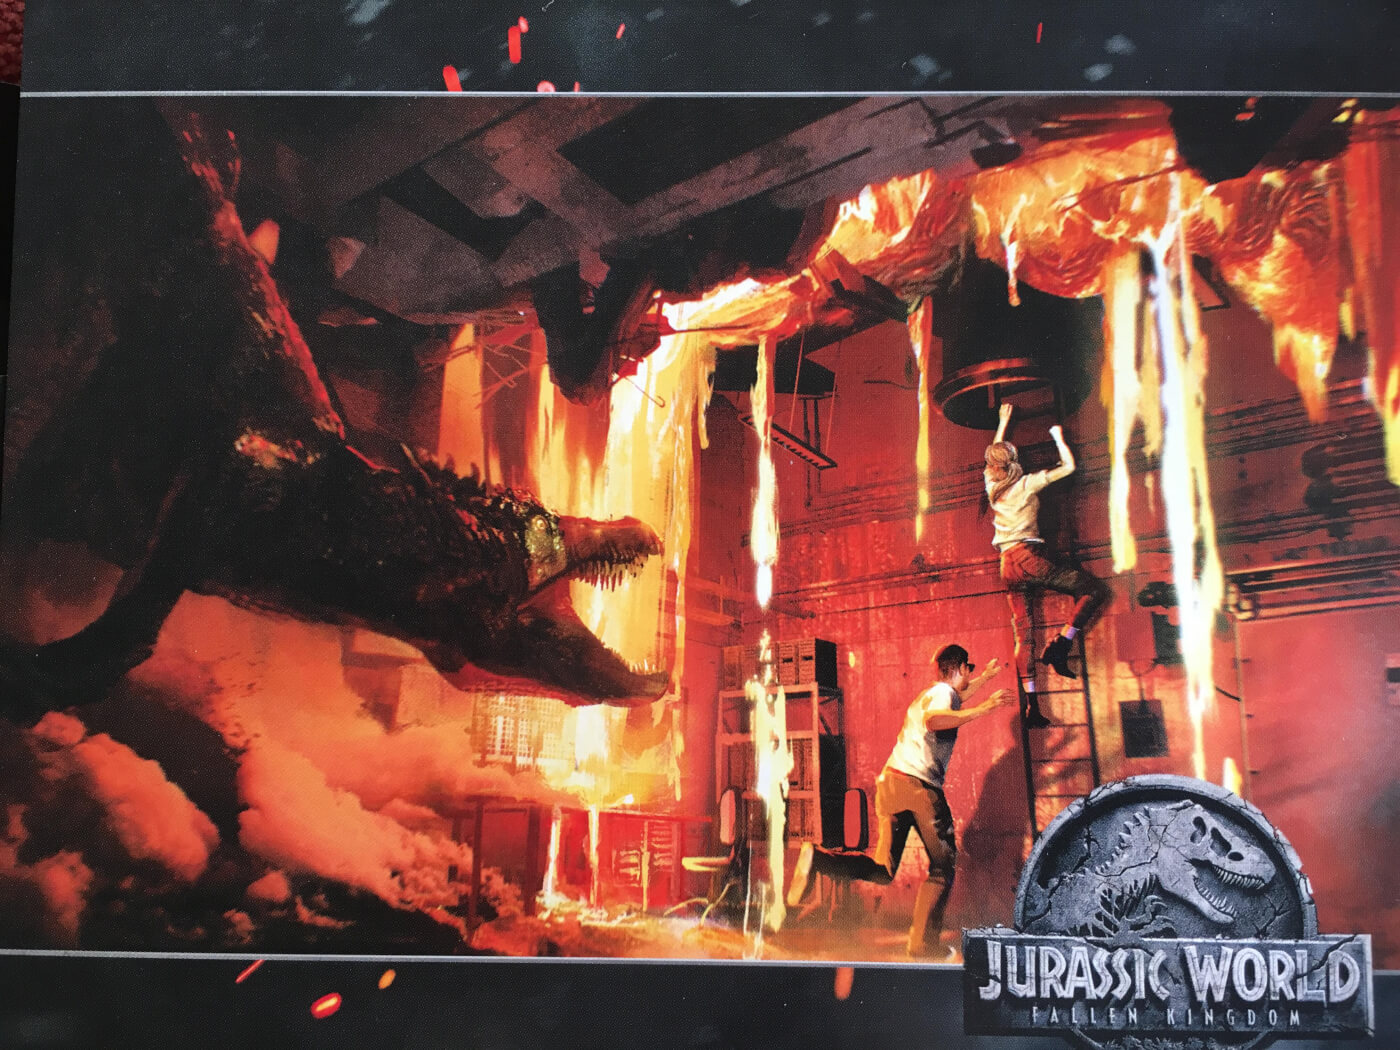 Check Out This Awesome ‘Jurassic World: Fallen Kingdom’ Concept Art!